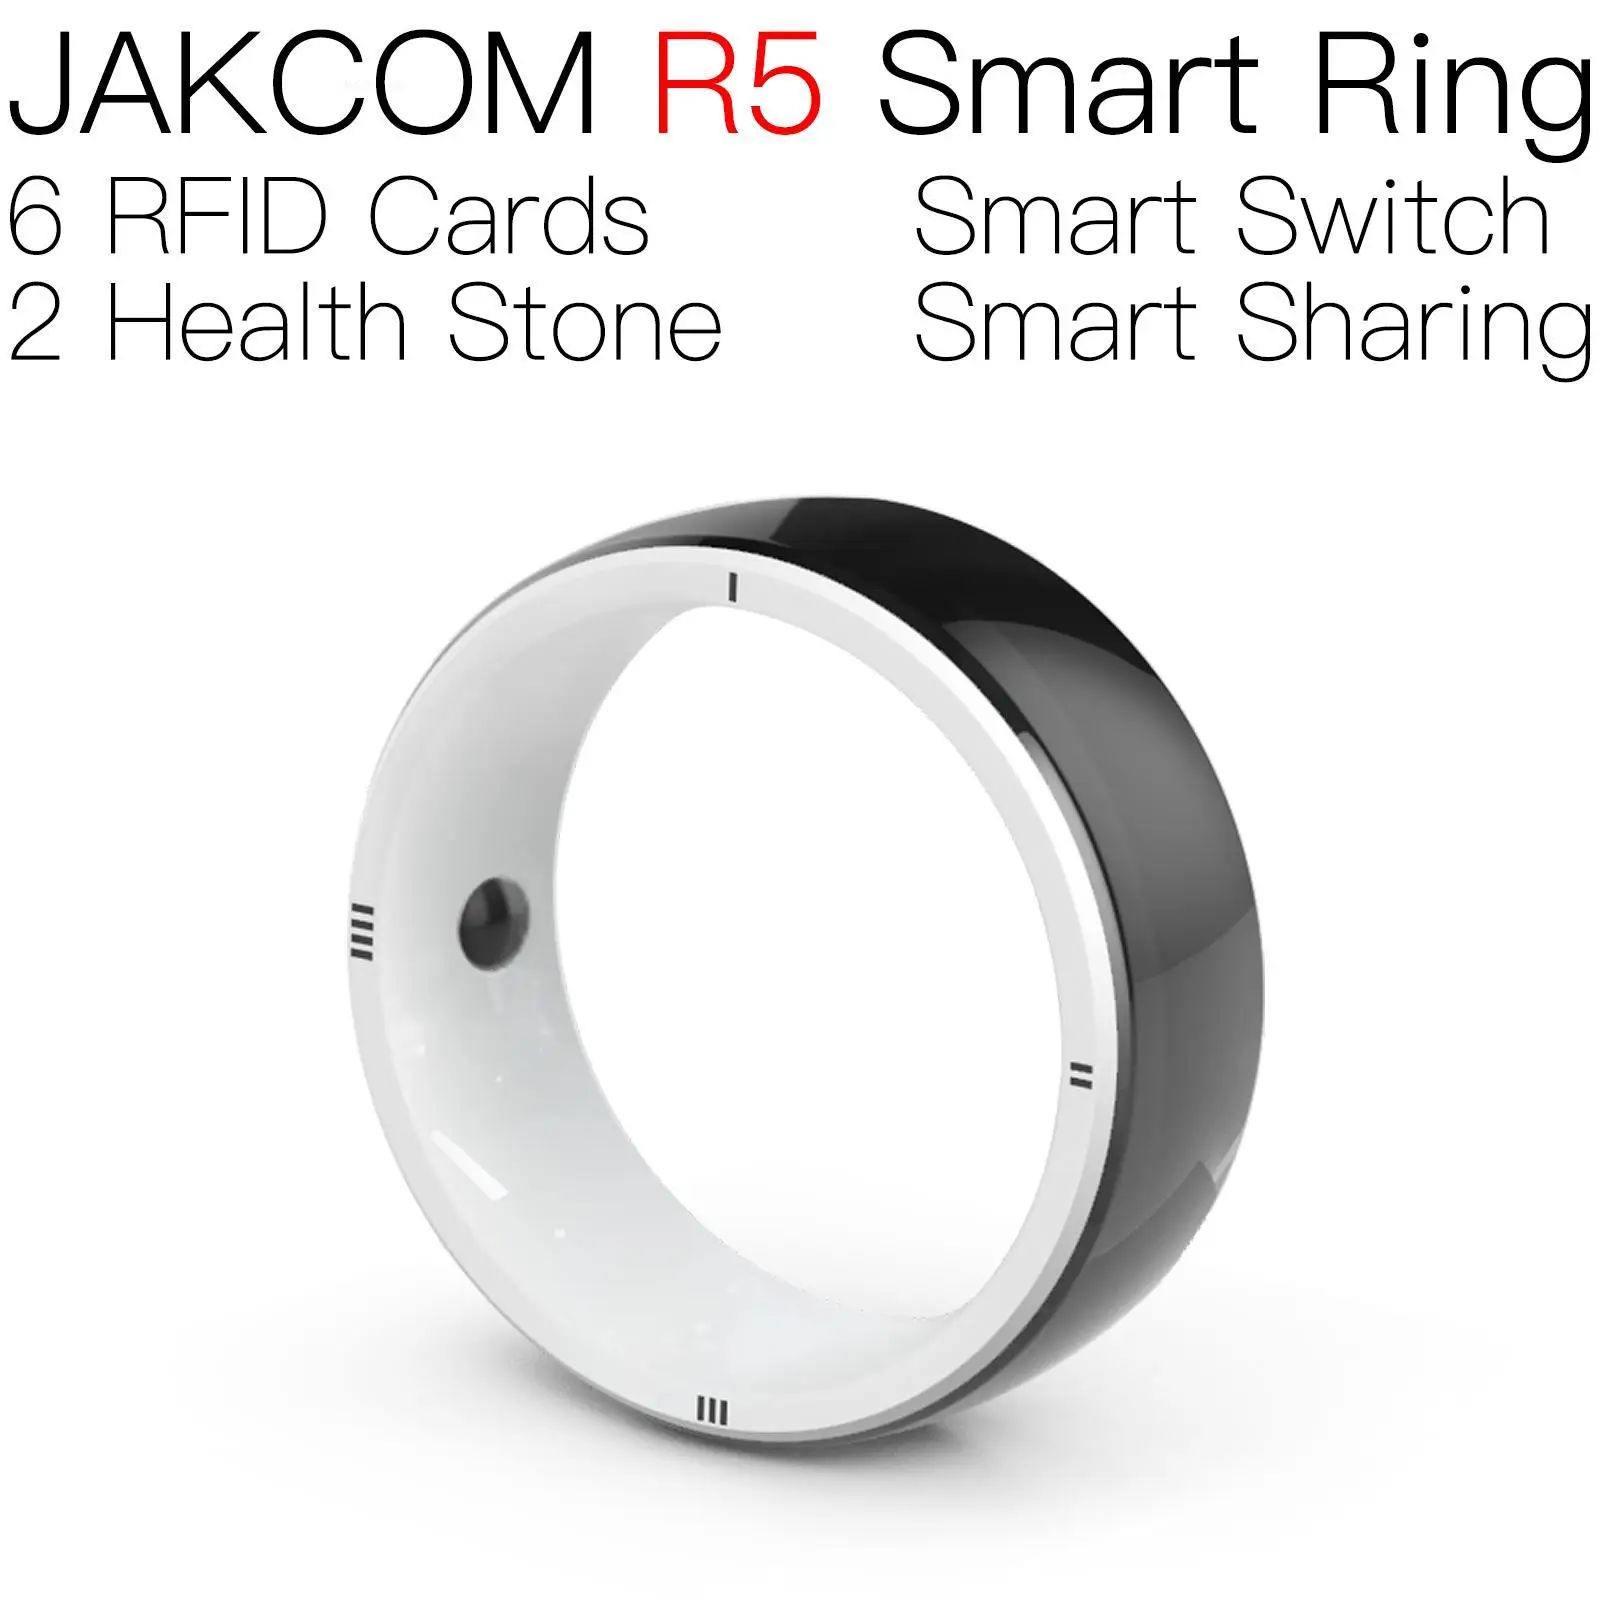 JAKCOM R5 Smart Ring For men women watches mini thermos flask bracelet band6 store official drill electron